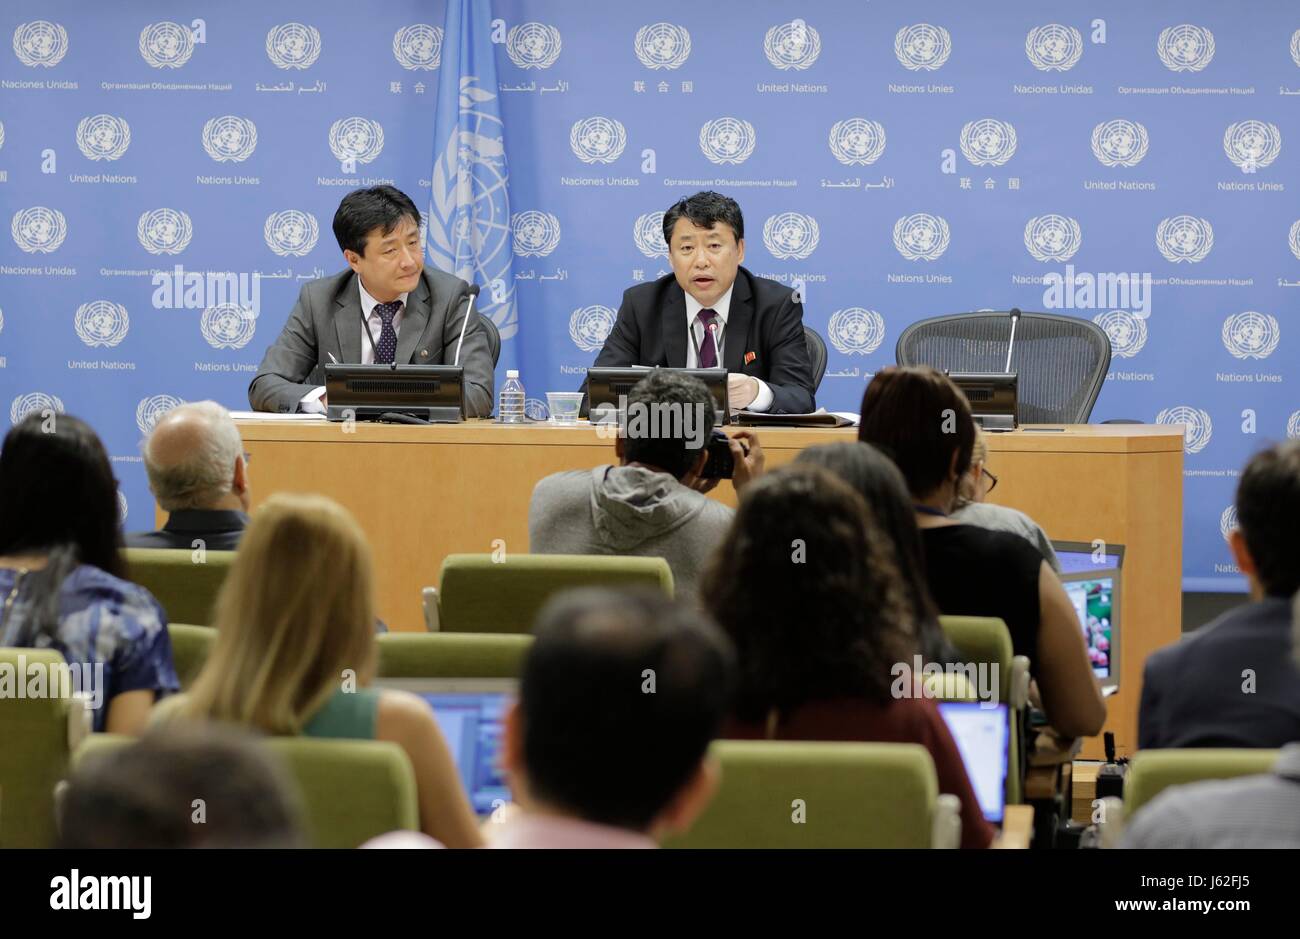 United Nations, New York, USA, May 19 2017 - Kim In Ryong (right), Deputy Permanent Representative of the Democratic Peoples Republic of Korea (DPRK) to the UN, briefs Journalists on the US Planning of Introducing more Sanctions at the Security Council Against his Country today at the UN Headquarters in New York. Photo: Luiz Rampelotto/EuropaNewswire | usage worldwide Stock Photo